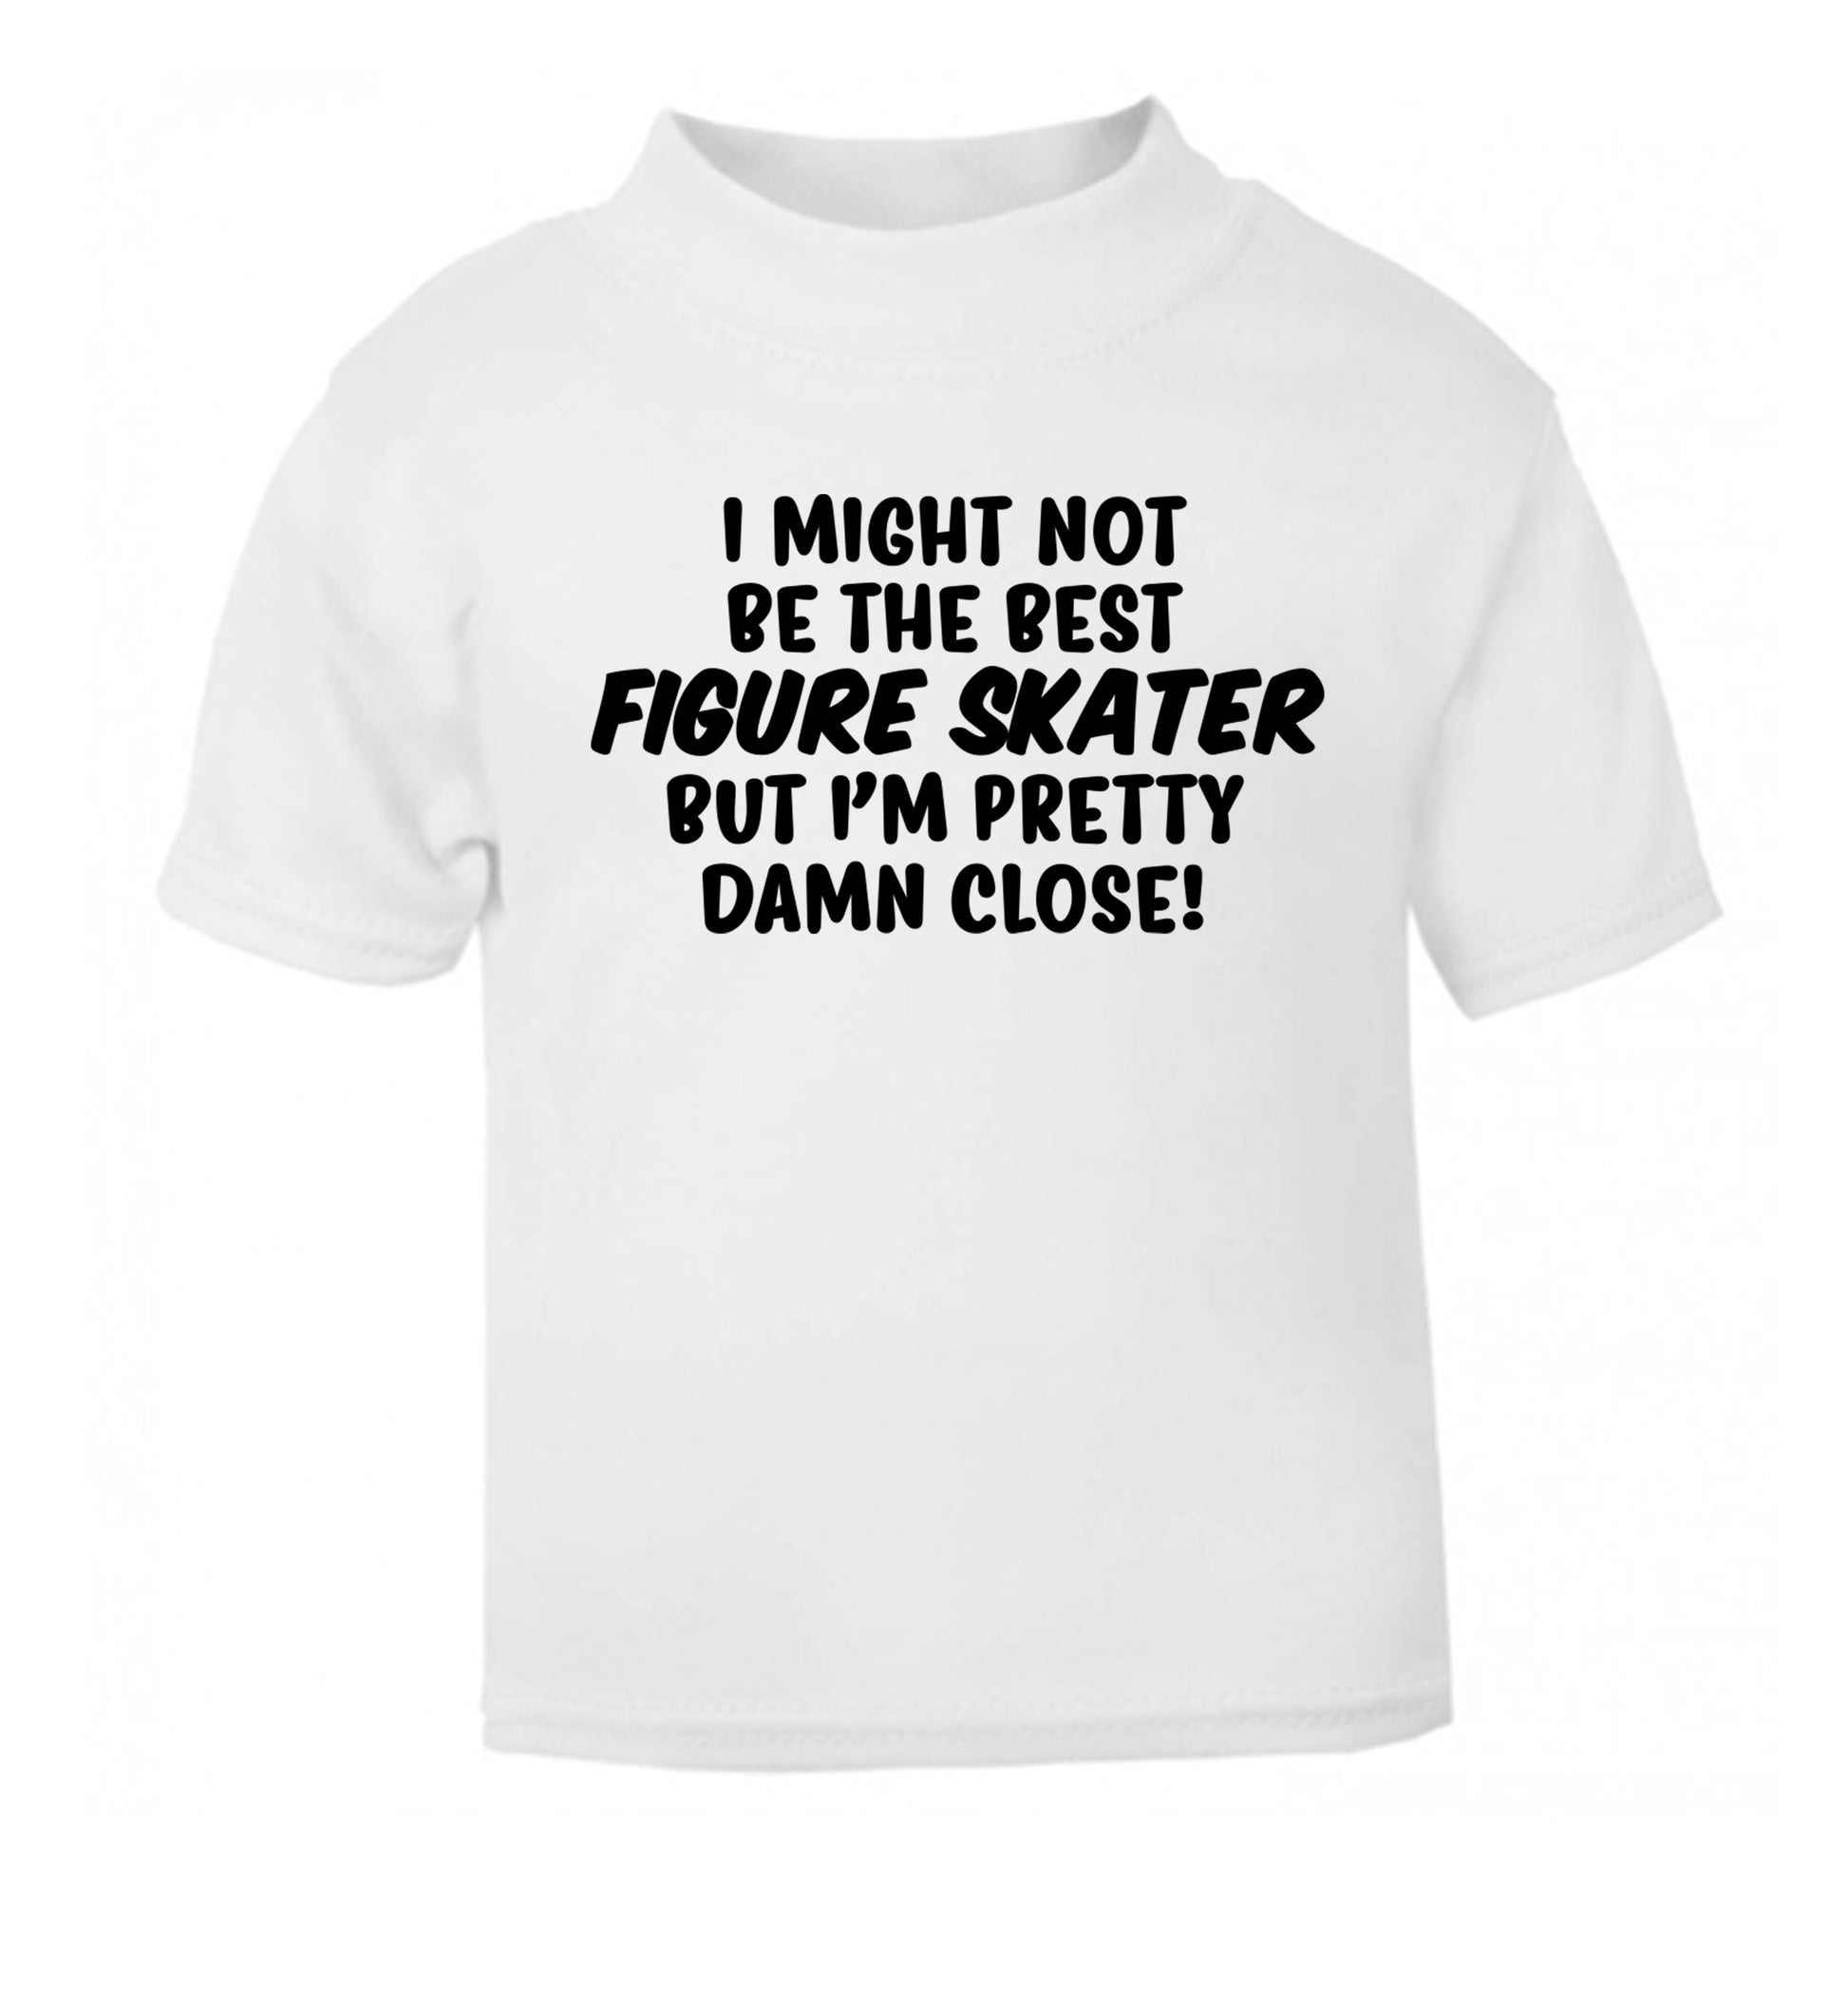 I might not be the best figure skater but I'm pretty damn close! white Baby Toddler Tshirt 2 Years